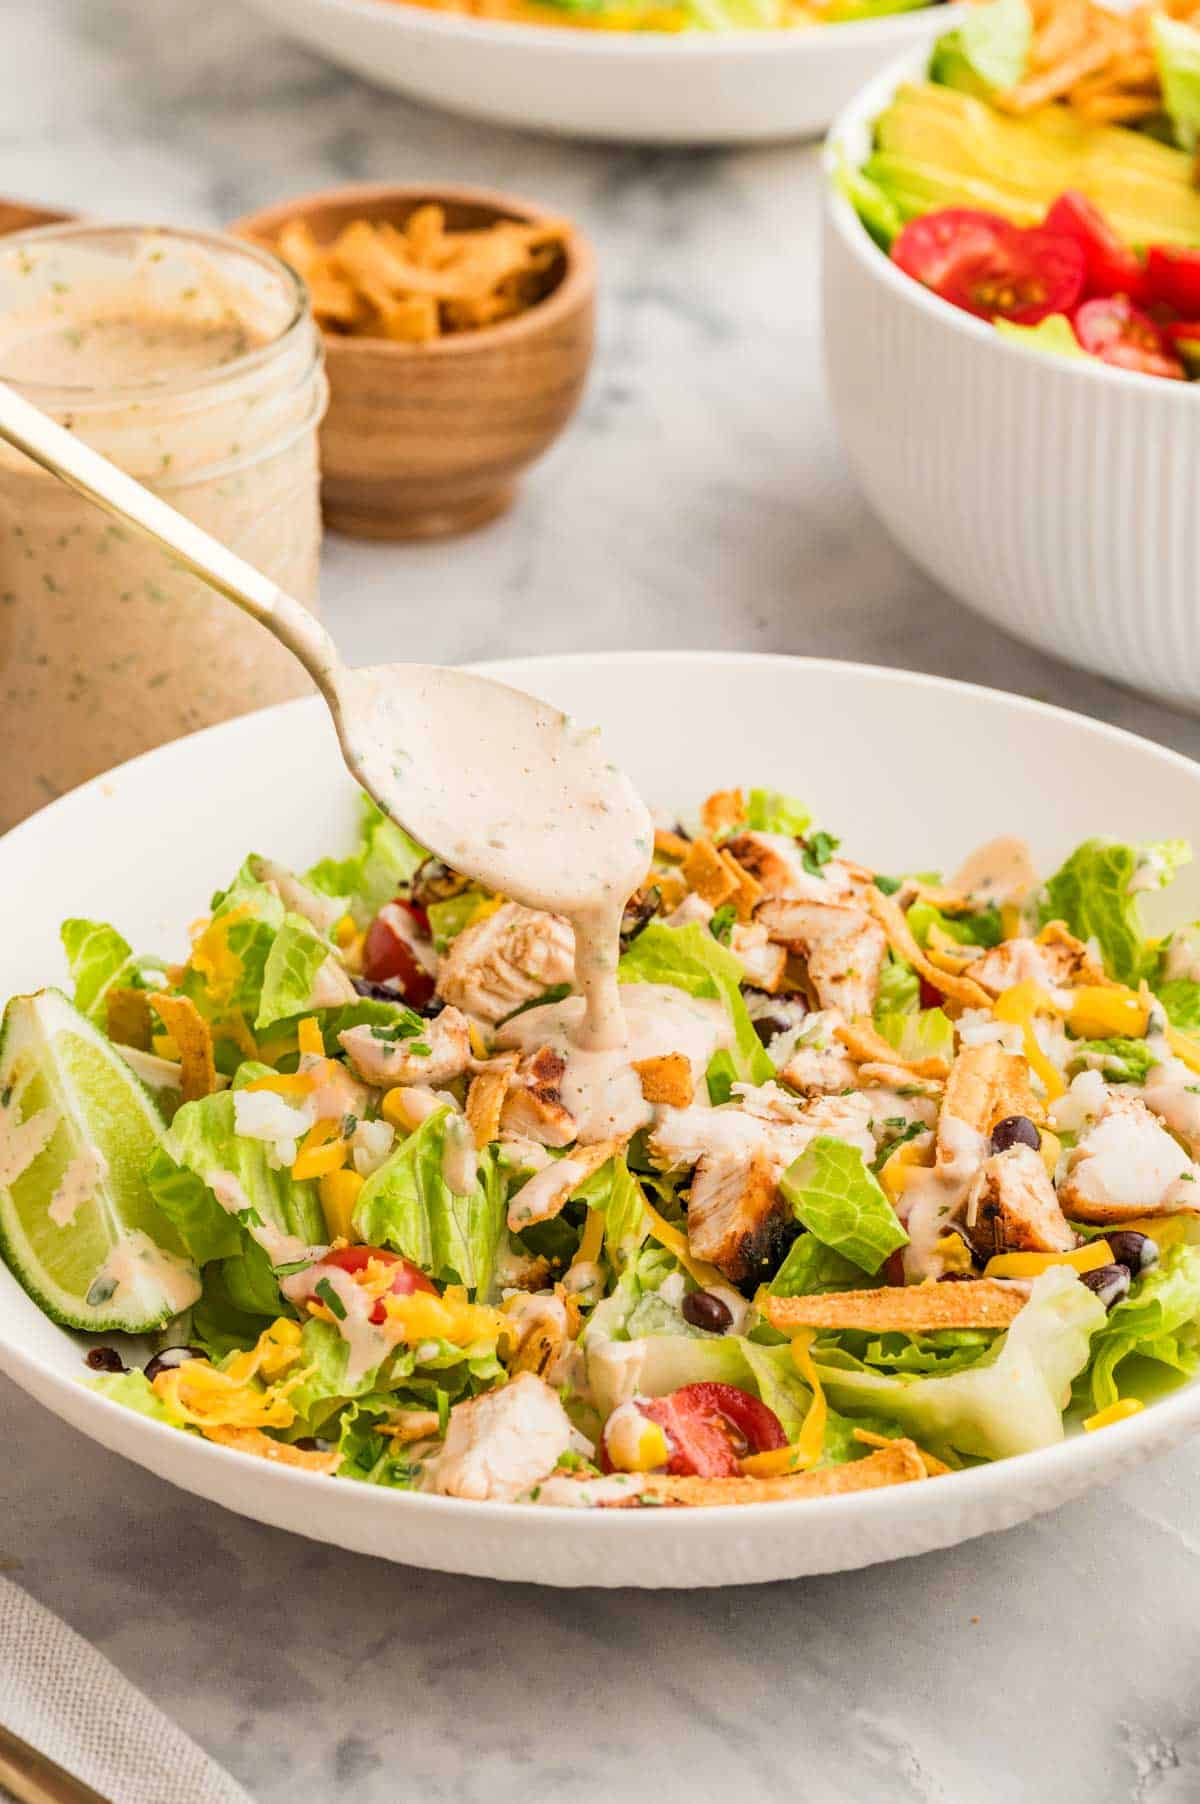 Spooning a creamy bbq lime dressing on top of salad.